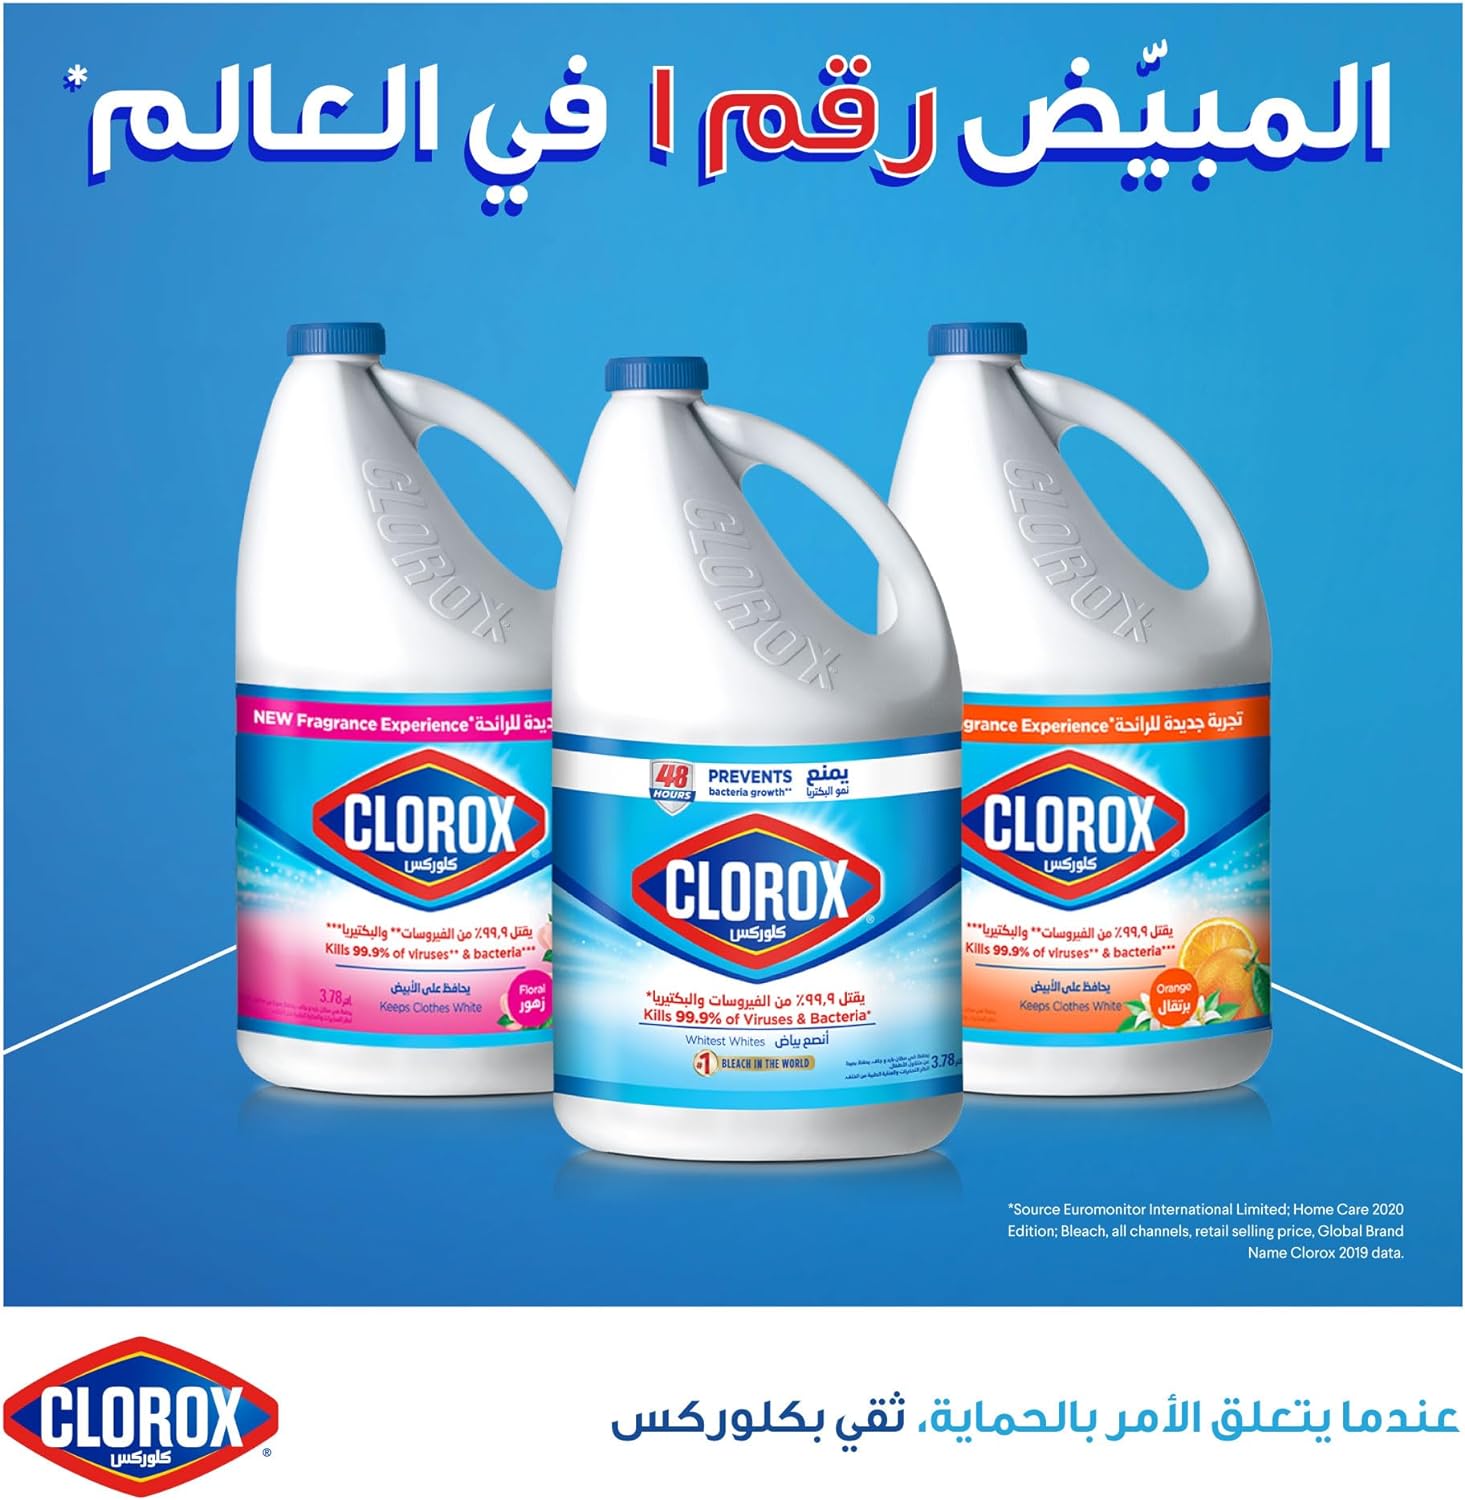 Clorox Liquid Bleach 3.78 Litres for Home & Office, Kills 99.9% Viruses & Bacteria, Removes Stains - Alcohol Free, Original Scent